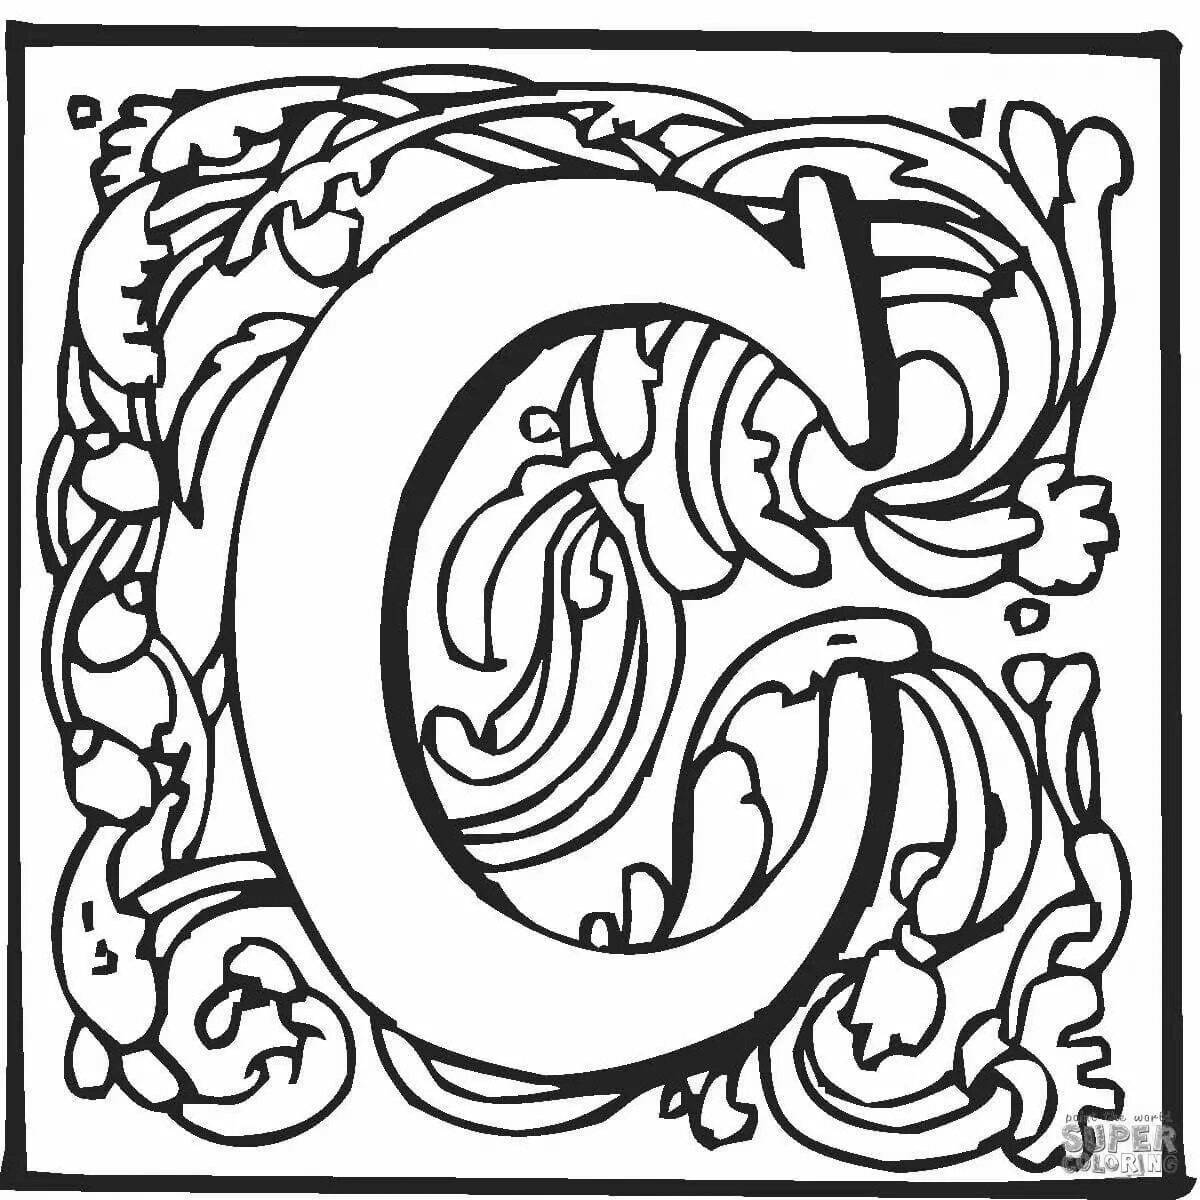 Charming coloring page letter a slavic